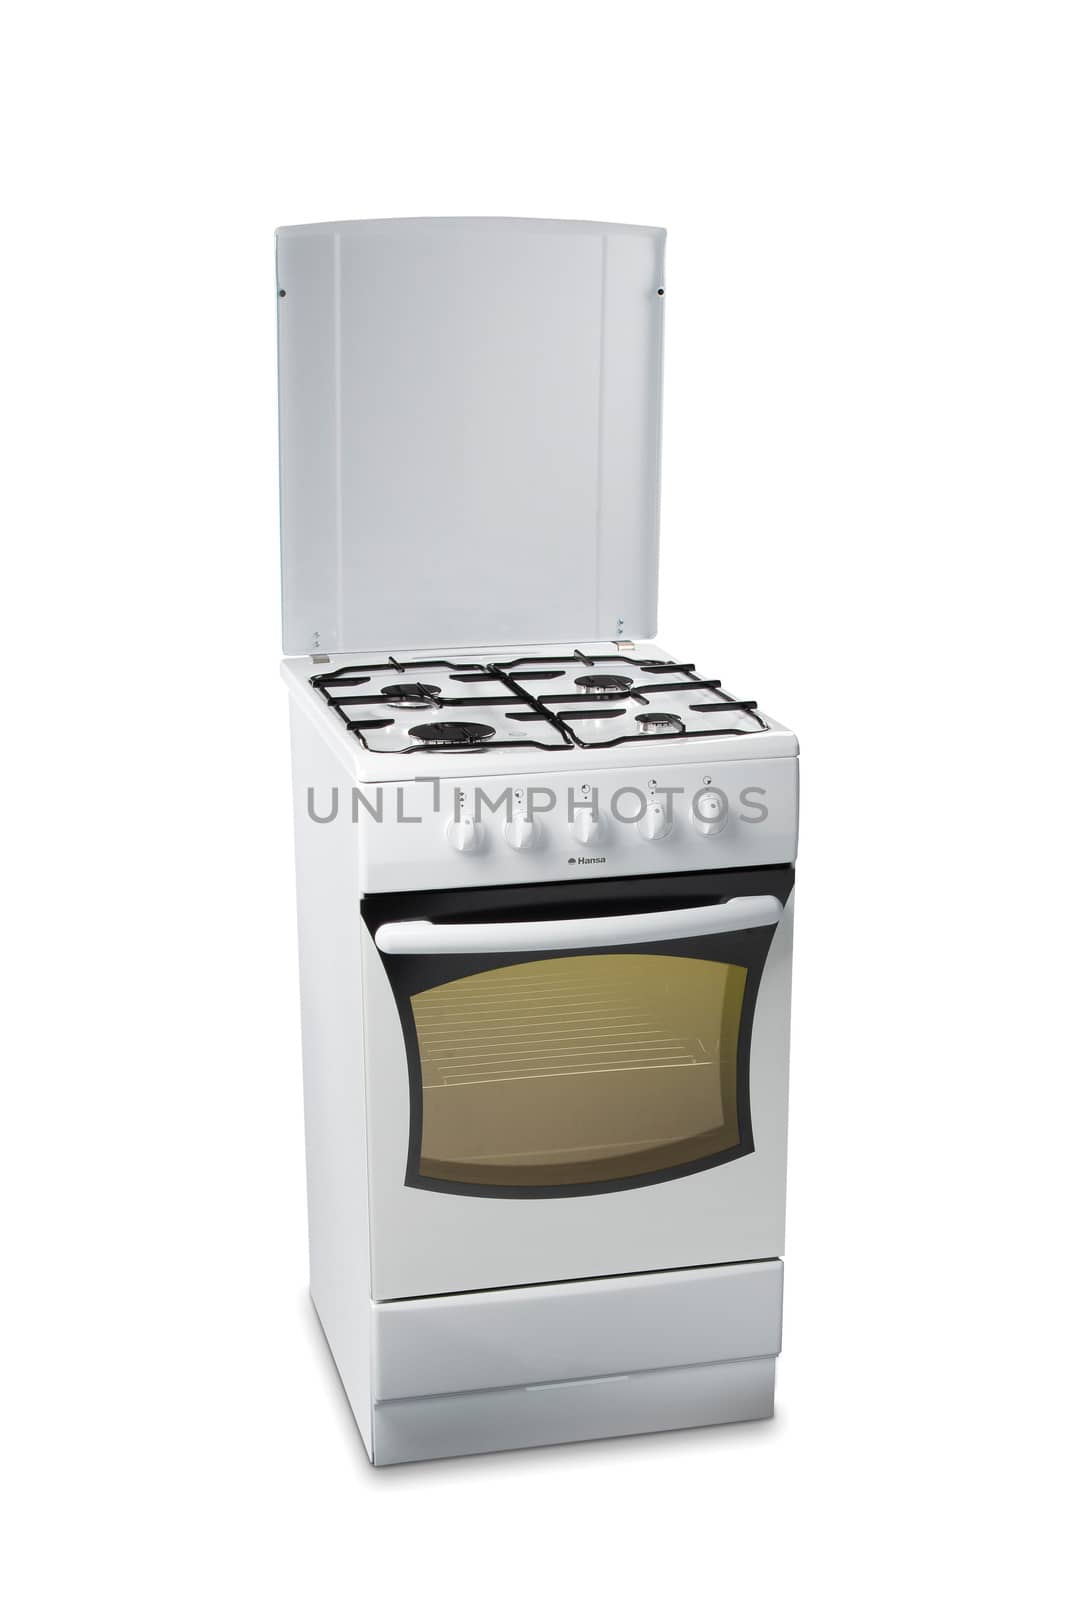 White stove with light in oven, isolated on white background